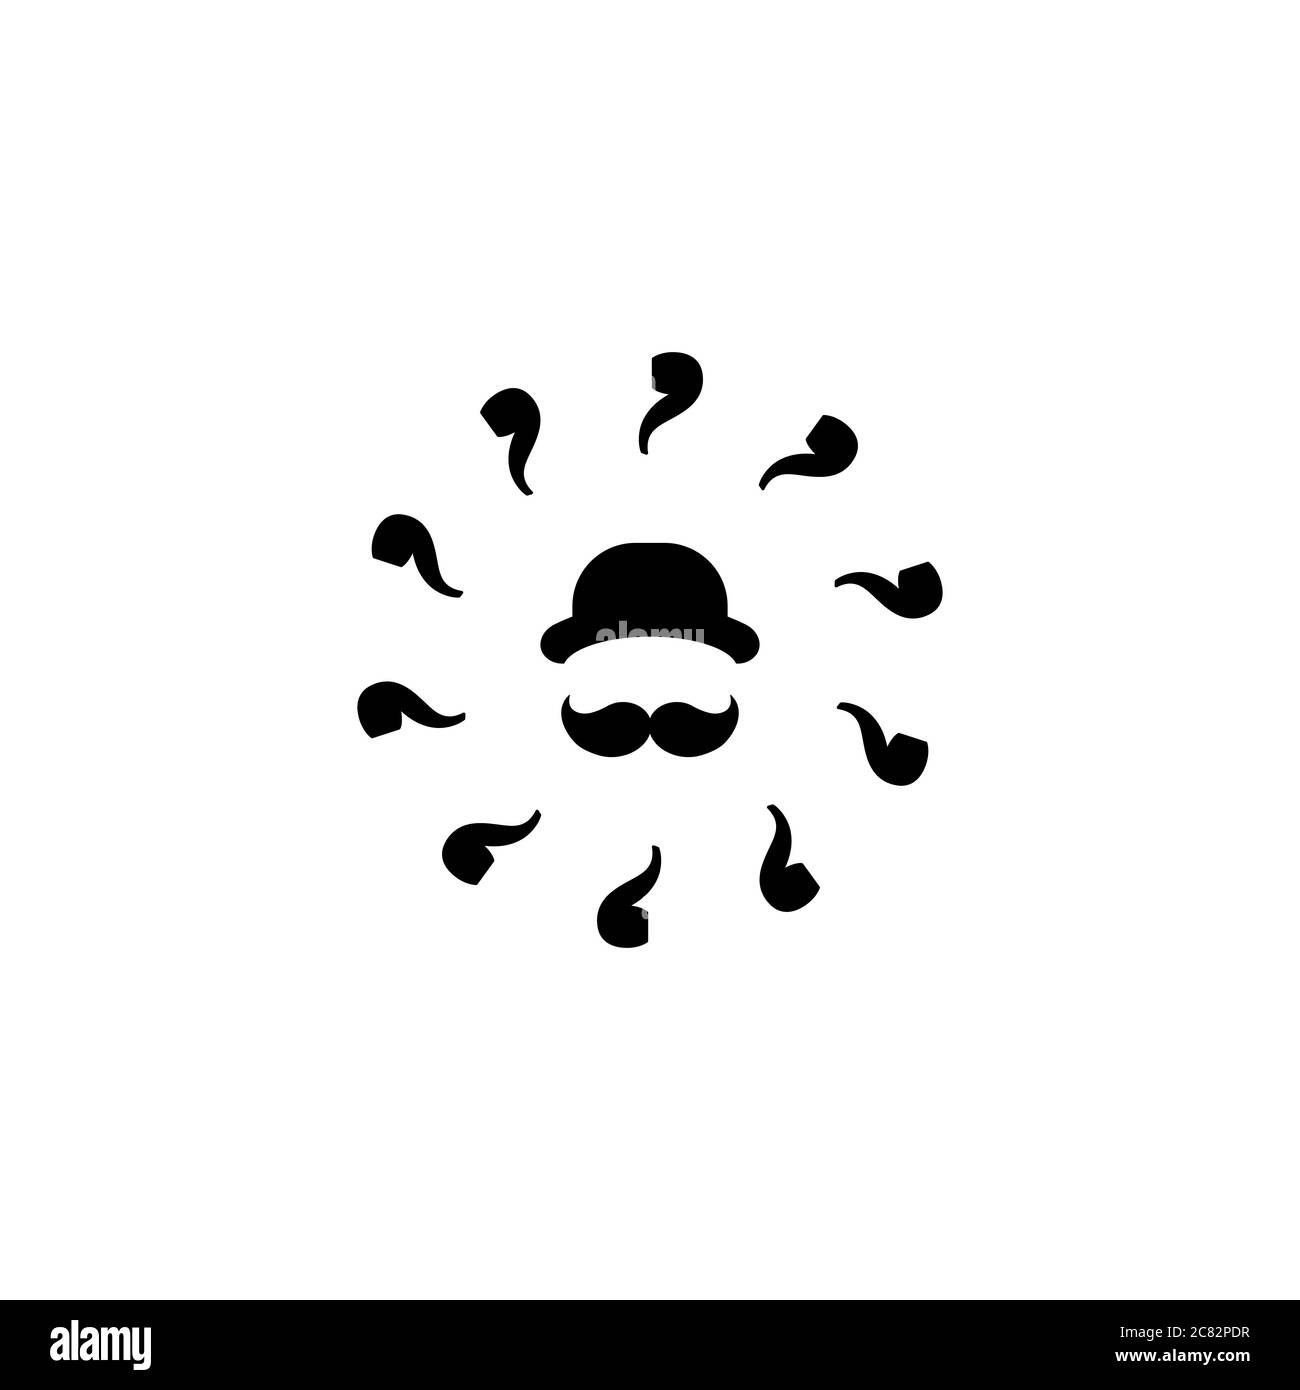 Silhouette of man's head with big moustache, bowler hat and smoking pipes. Gentleman icon isolated on white. Mafia, tobacco, party. Isolated on white. Stock Vector